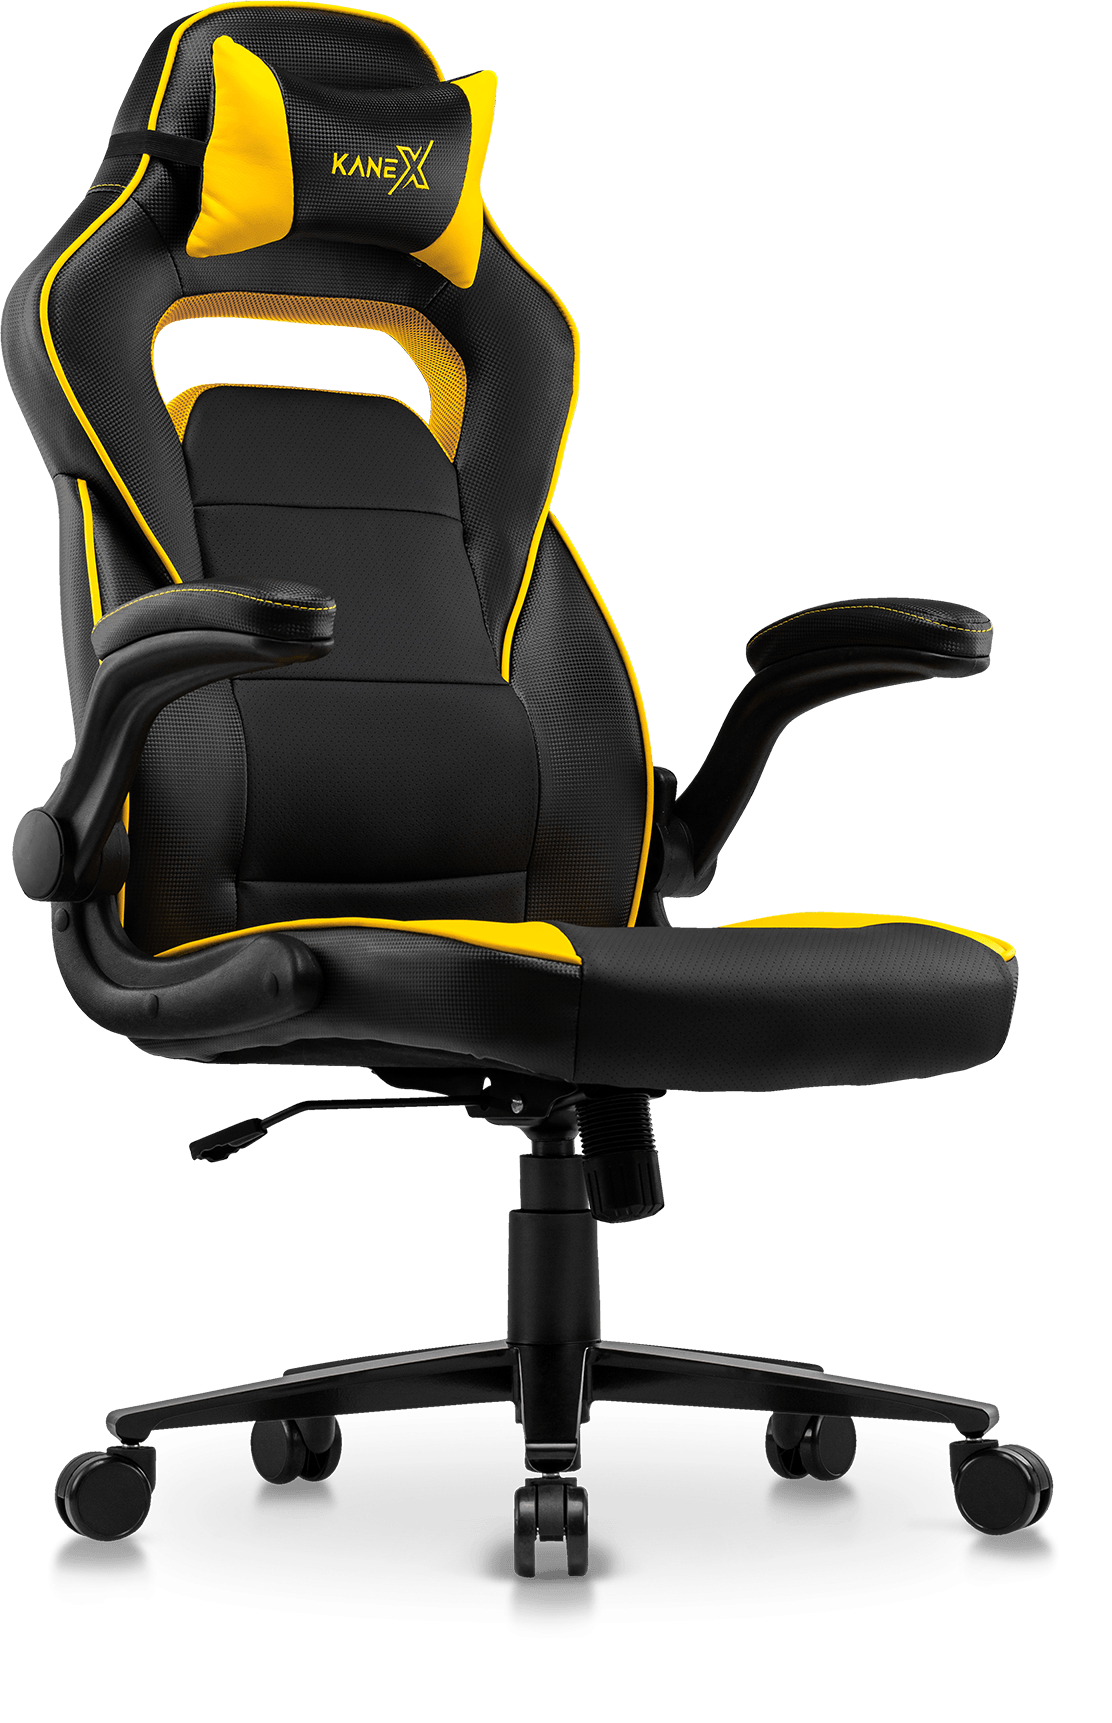 6 Best Gaming Chairs In Singapore: Under $400 | Singsaver